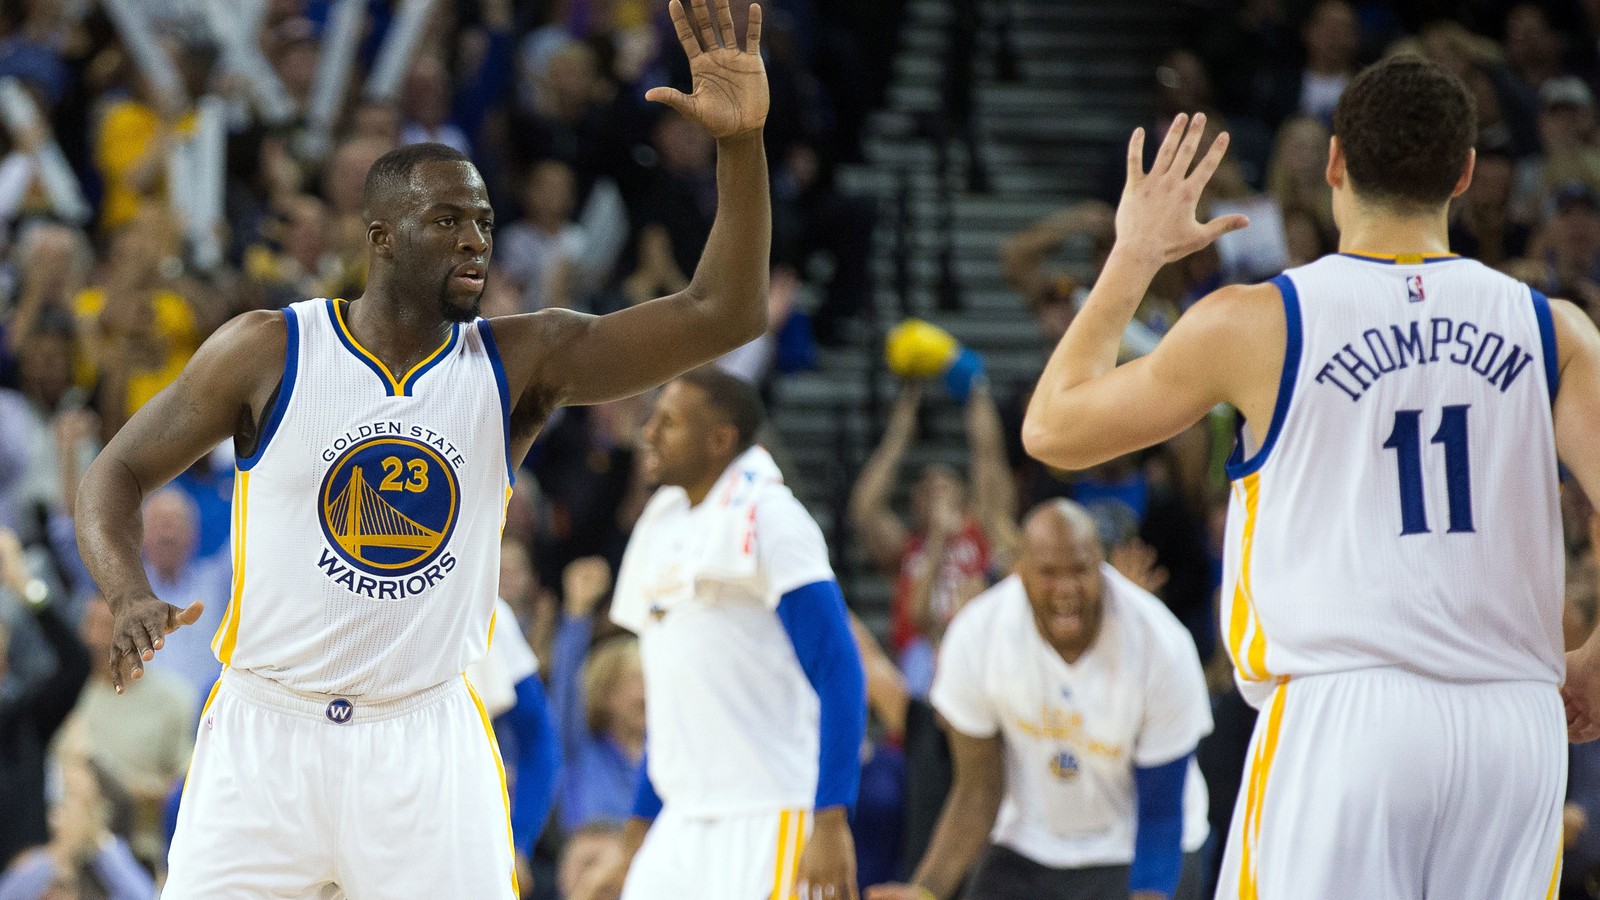 Warriors top Spurs ti tie 96 Bulls record with 72nd win